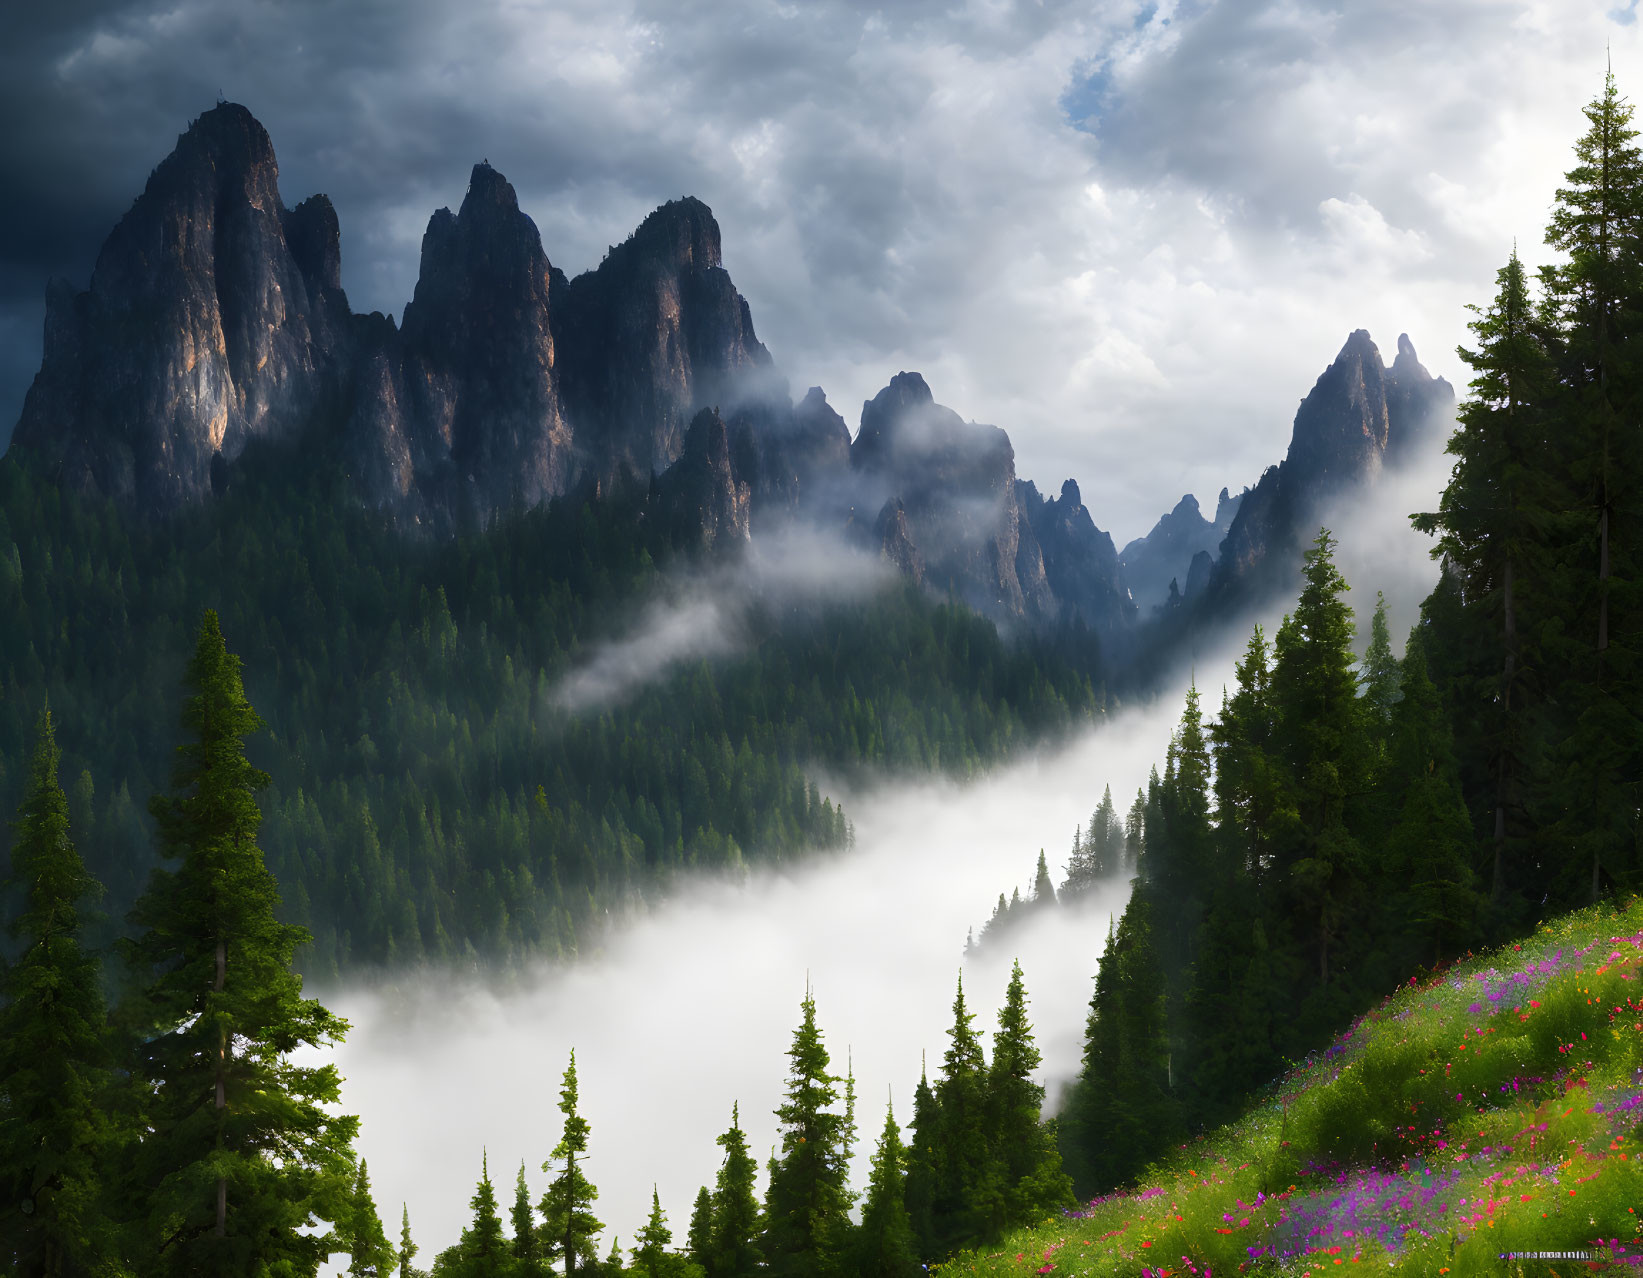 Majestic mountain landscape with mist, towering peaks, green trees, wildflowers, and dynamic cloudy